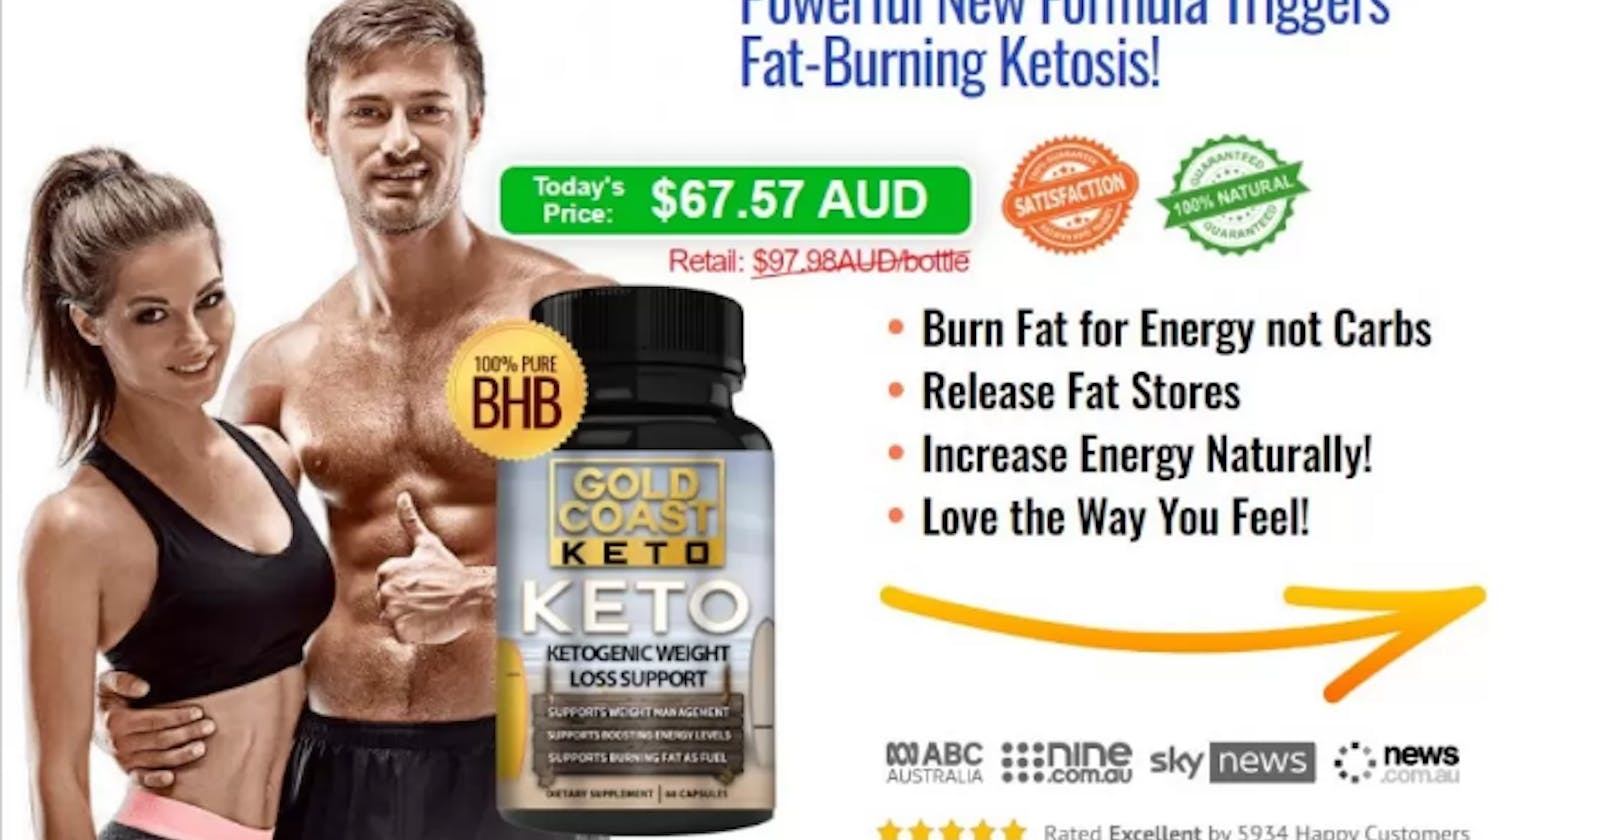 Best Weight Loss Supplements: Gold Coast Keto Maggie Beer Australia #1 Fat Burner Reviews, Ingredients, Benefits, Where To Buy? Official Best